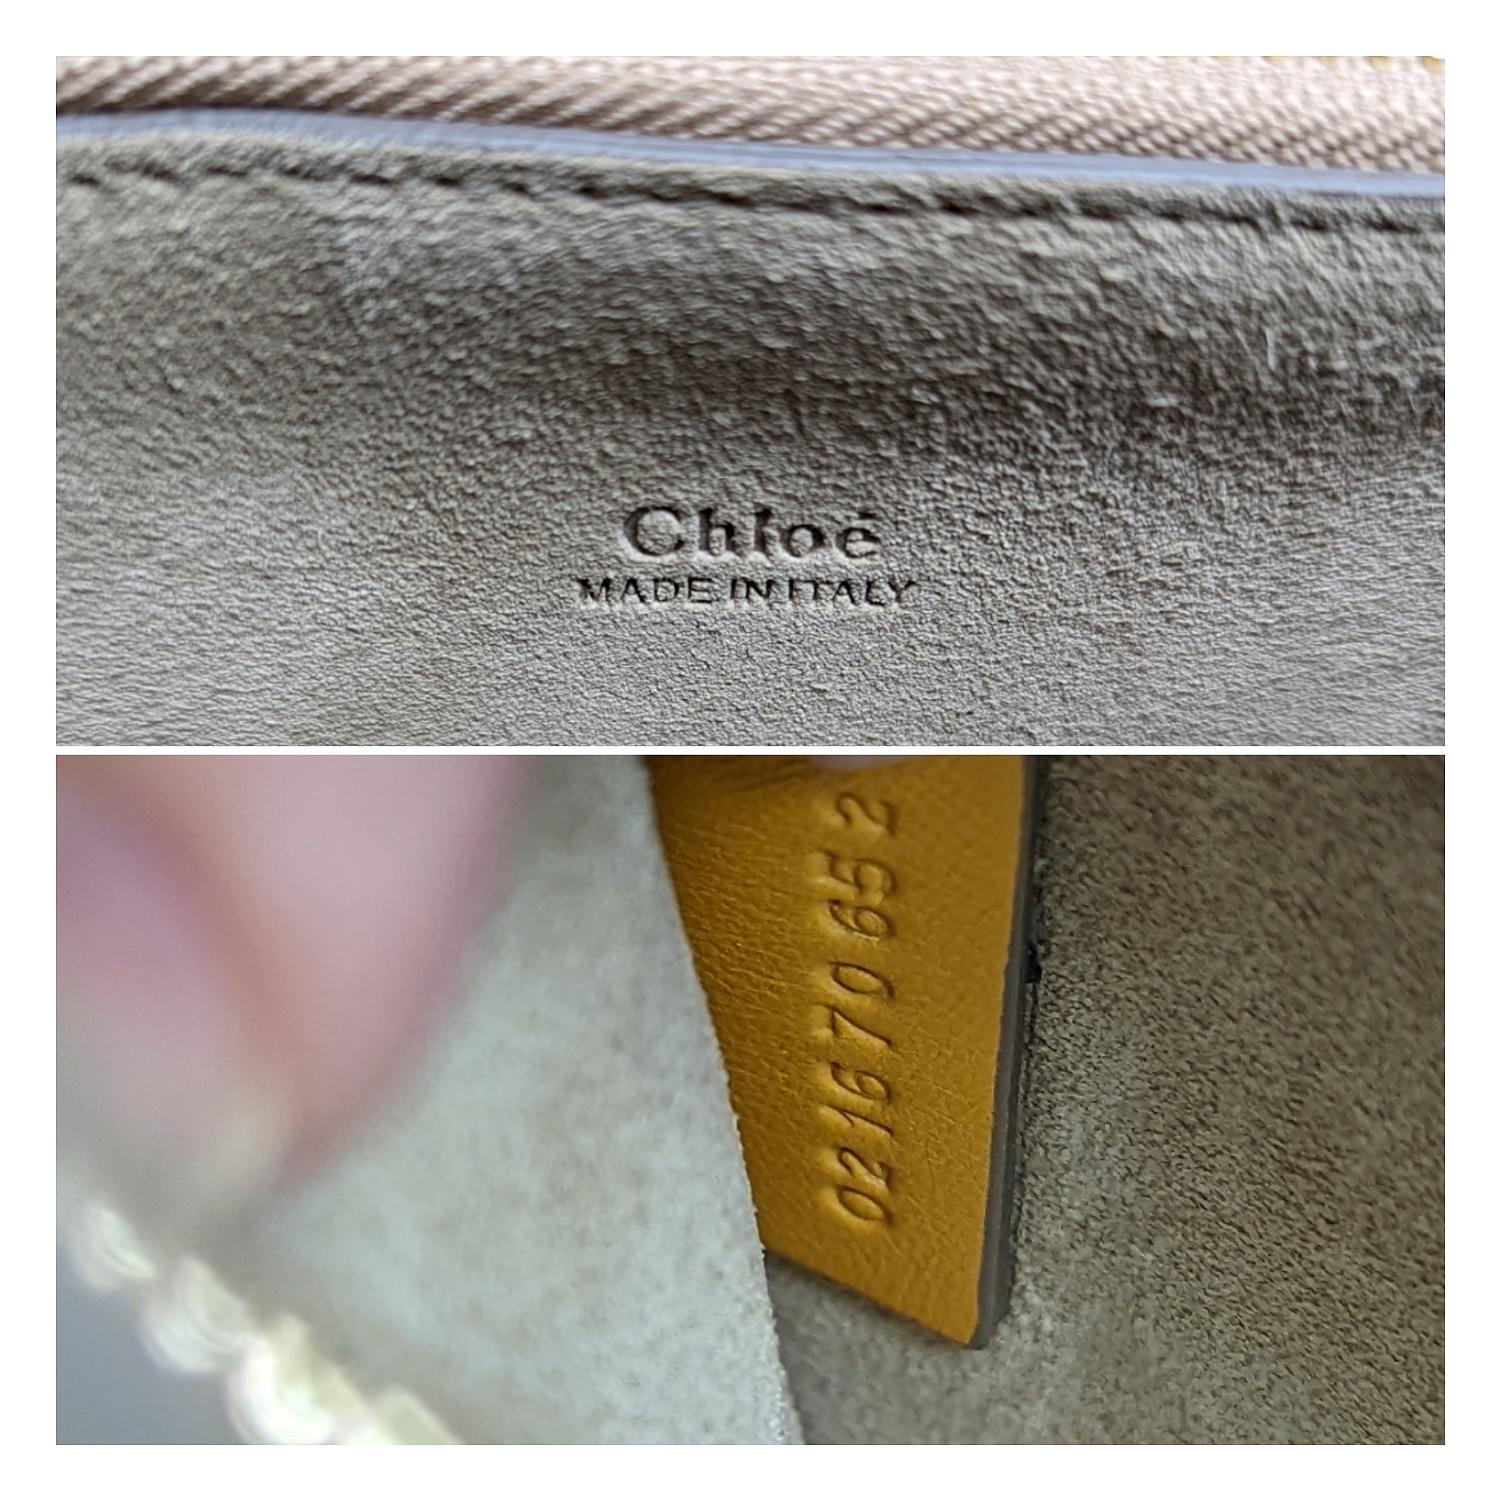 Chloé Medium Leather Suede Faye Shoulder Bag In Good Condition For Sale In Scottsdale, AZ